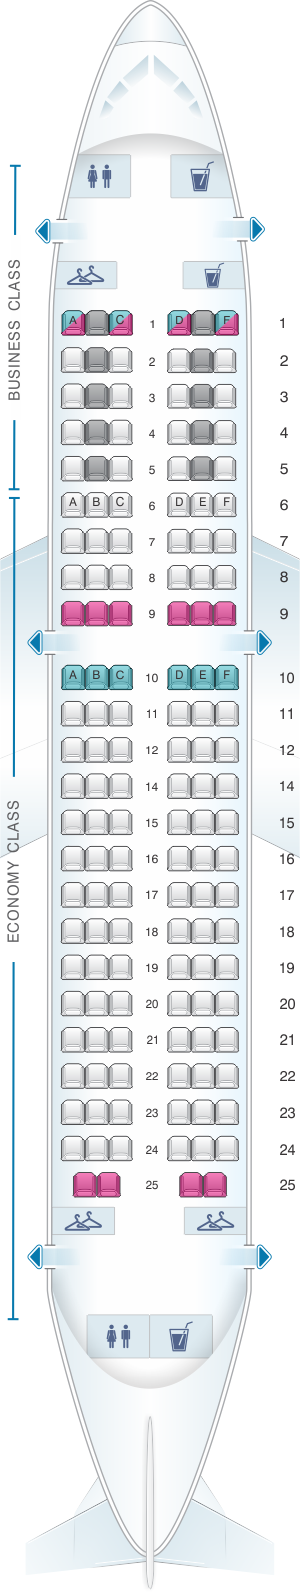 Seat Map Air France Airbus A319 Europe V1 | SeatMaestro